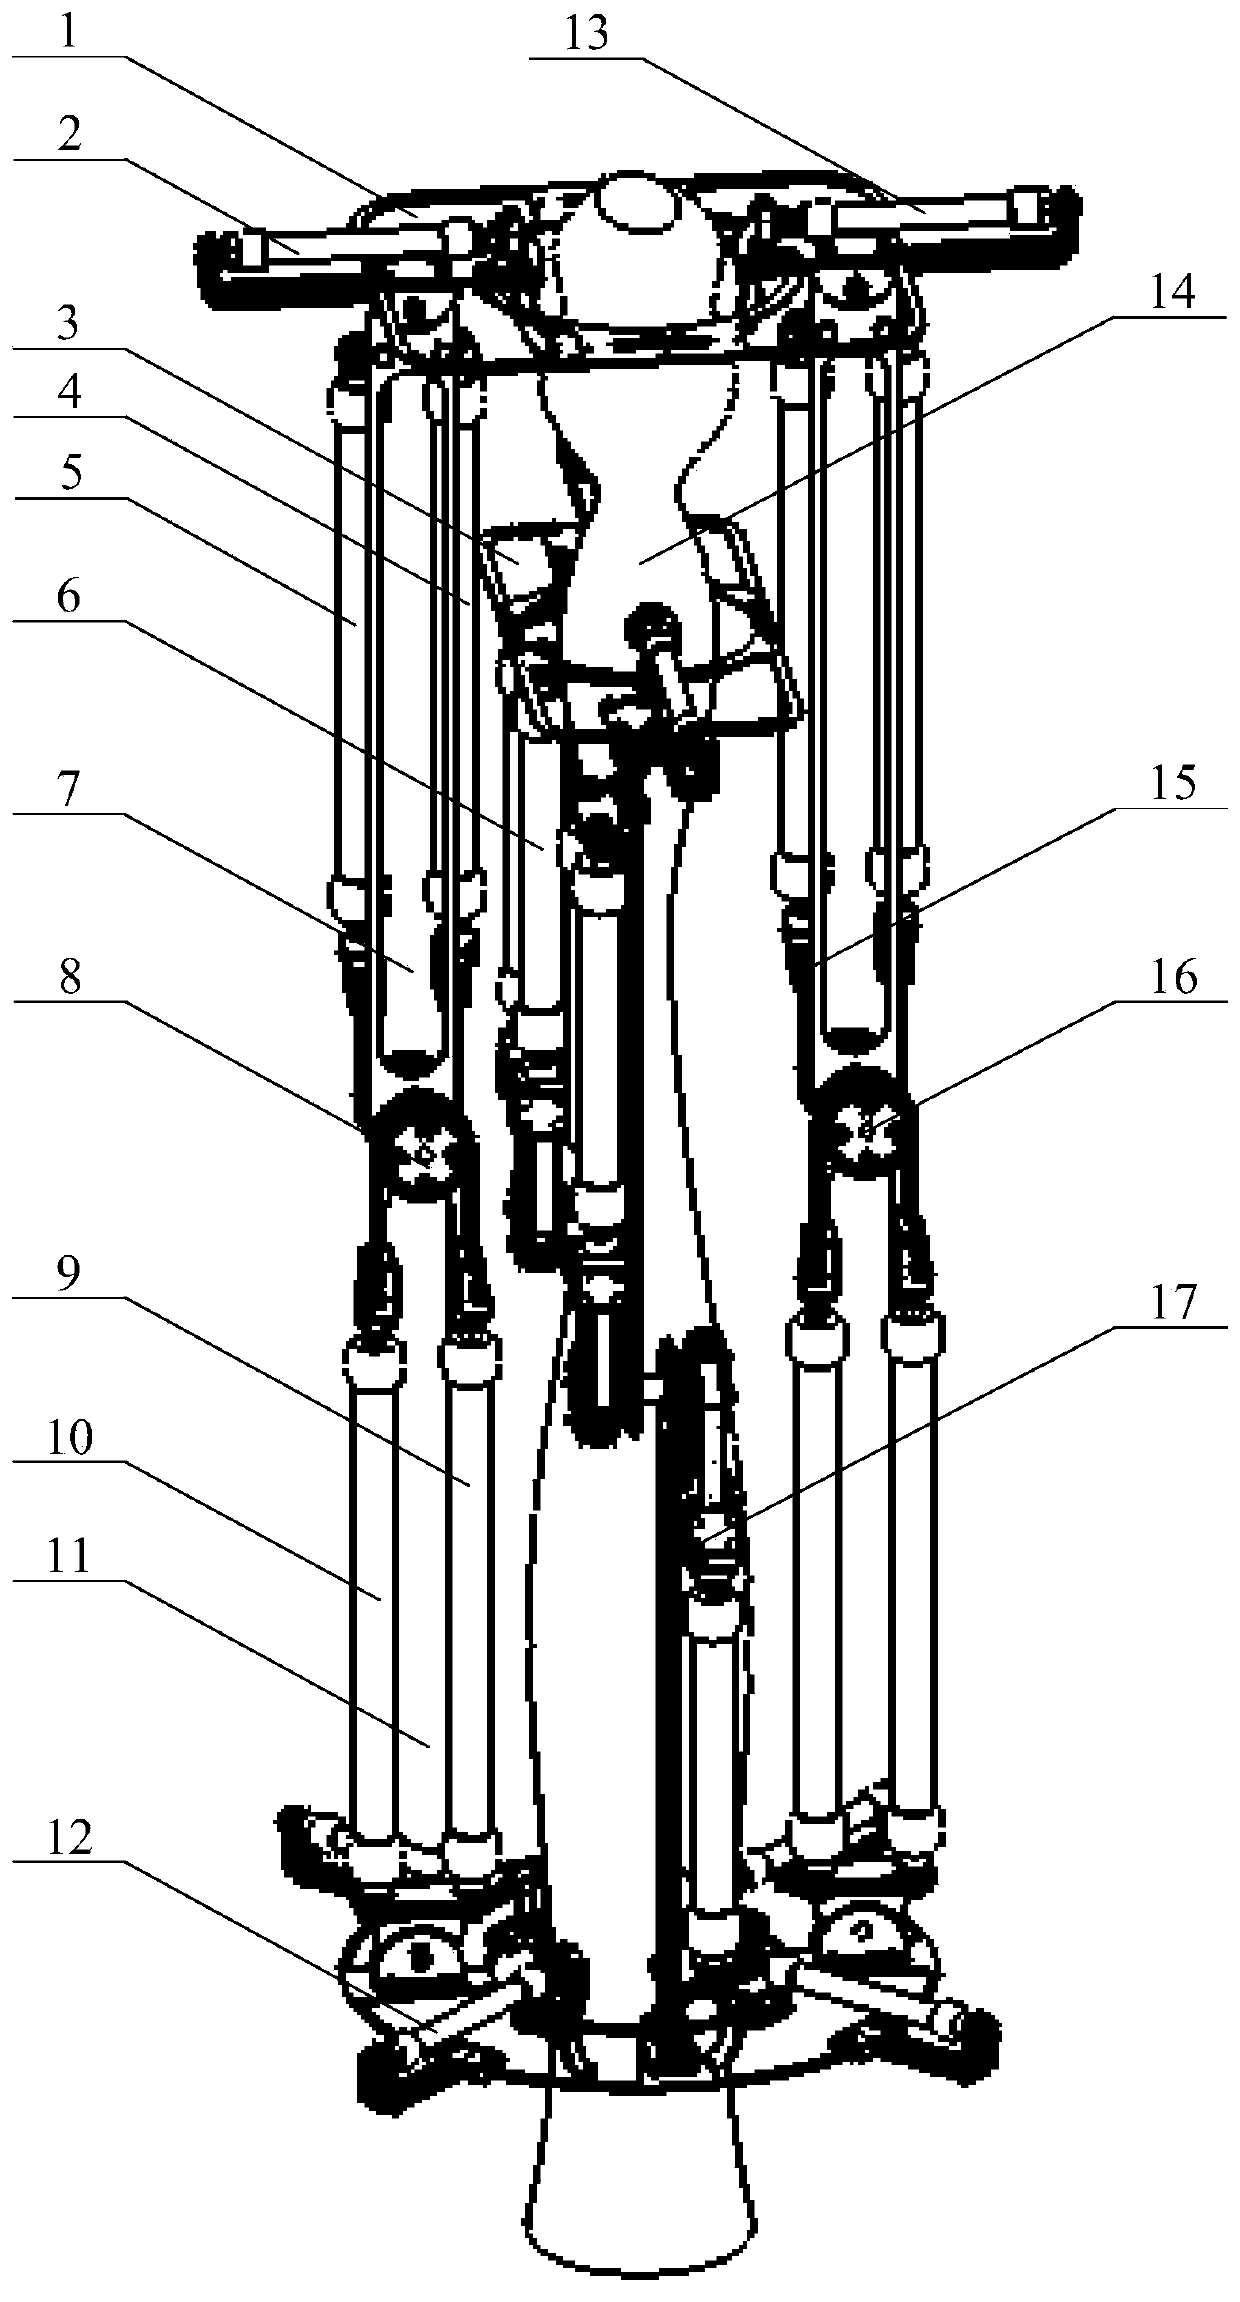 Multi-degree-of-freedom humanoid pole-climbing robot based on pneumatic muscles and its control system